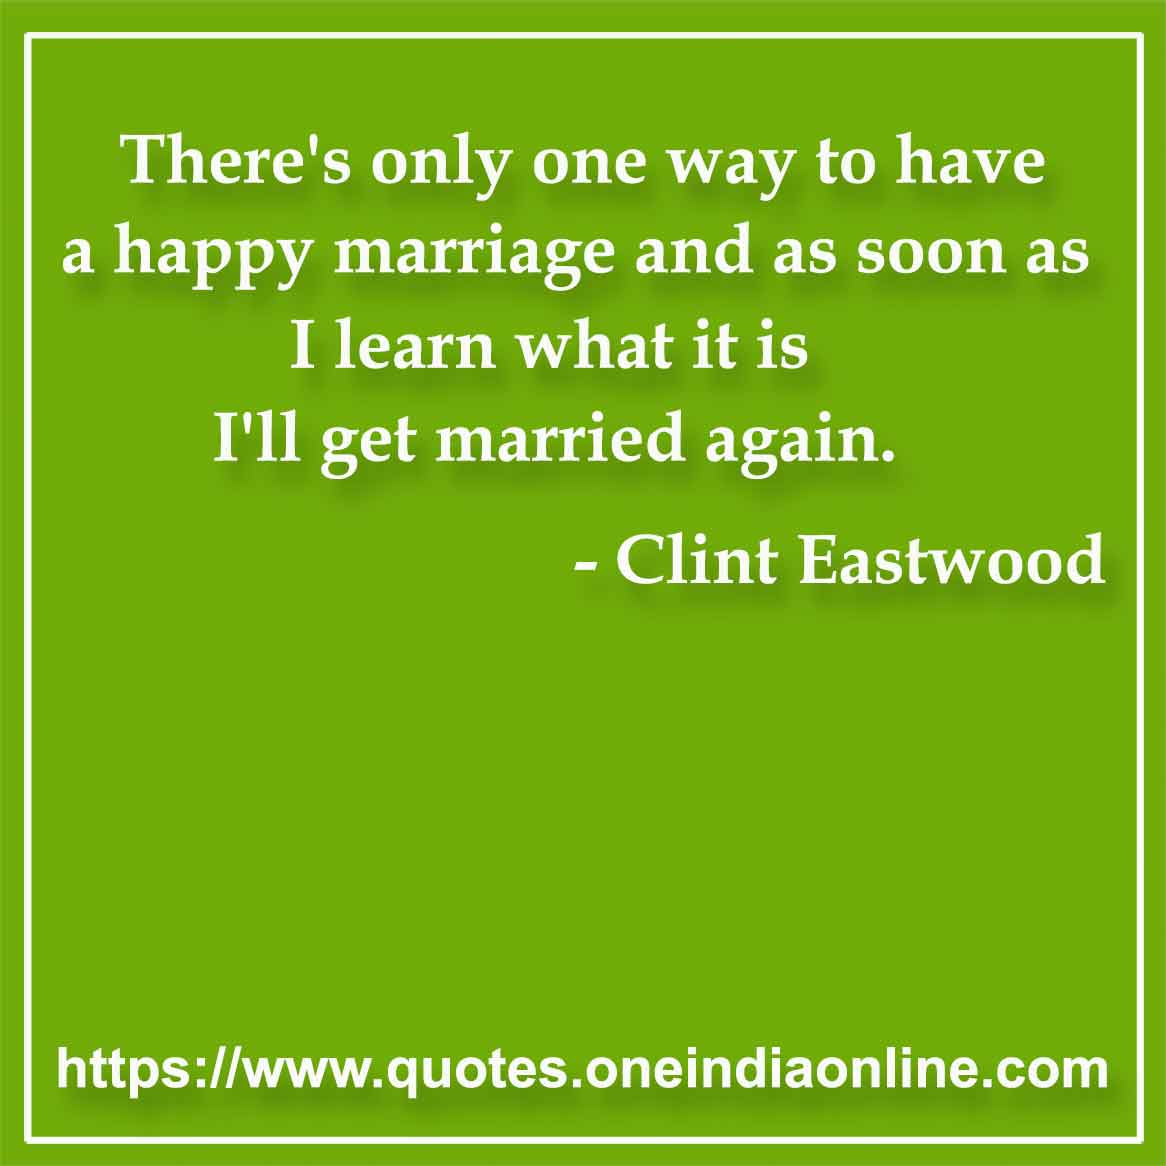 There's only one way to have a happy marriage and as soon as I learn what it is I'll get married again.

- Marriage Quotes by Clint Eastwood 